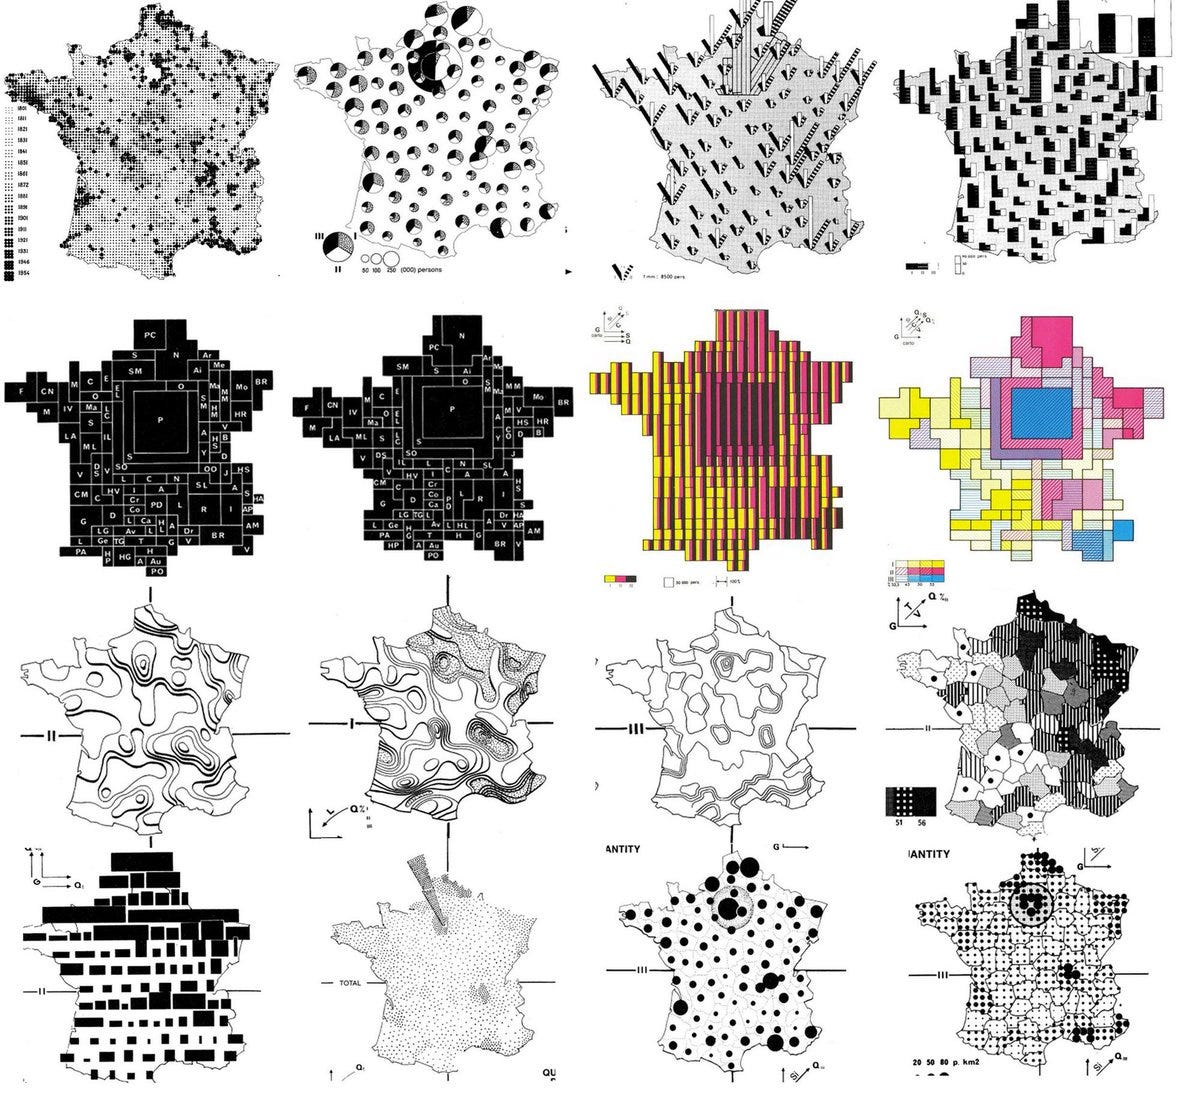 Trevor Bedford on Twitter: "BTW I would recommend Bertin's Semiology of  Graphics (https://t.co/bAPblWWV2w) for these sorts of issues of embedding  quantitative information into maps.… https://t.co/PrGsIys66R"